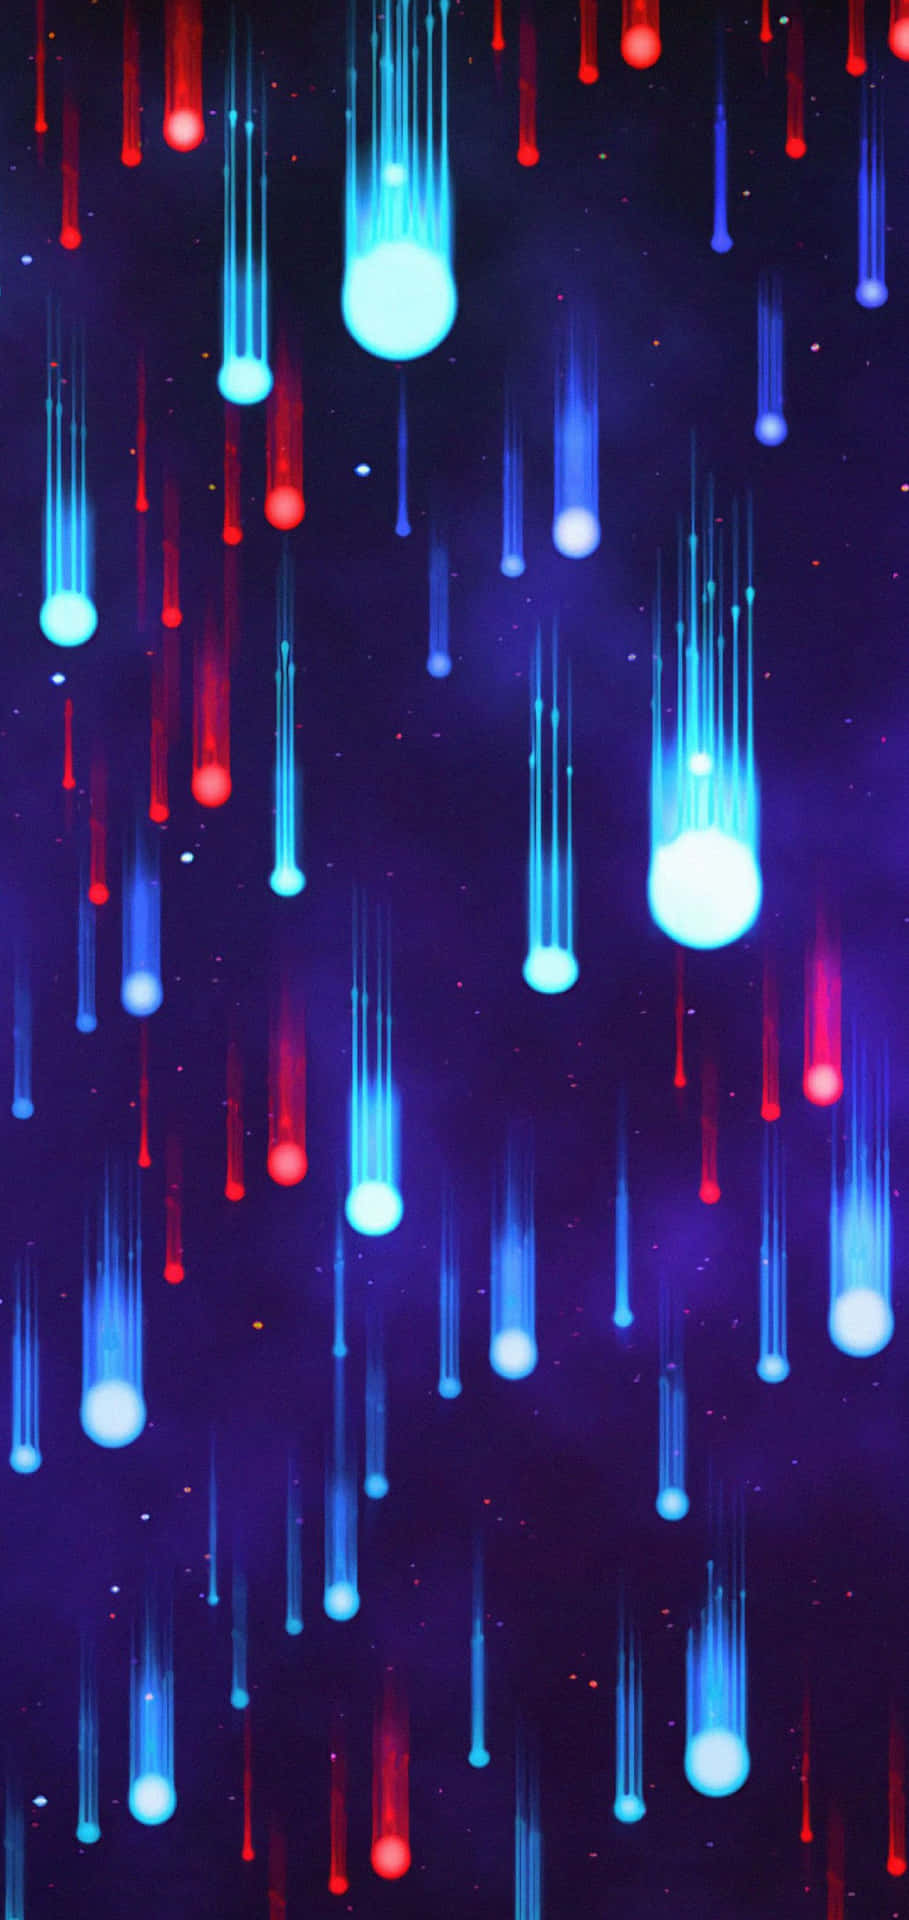 Explore the ultra-modern colors of the Neon Galaxy Wallpaper